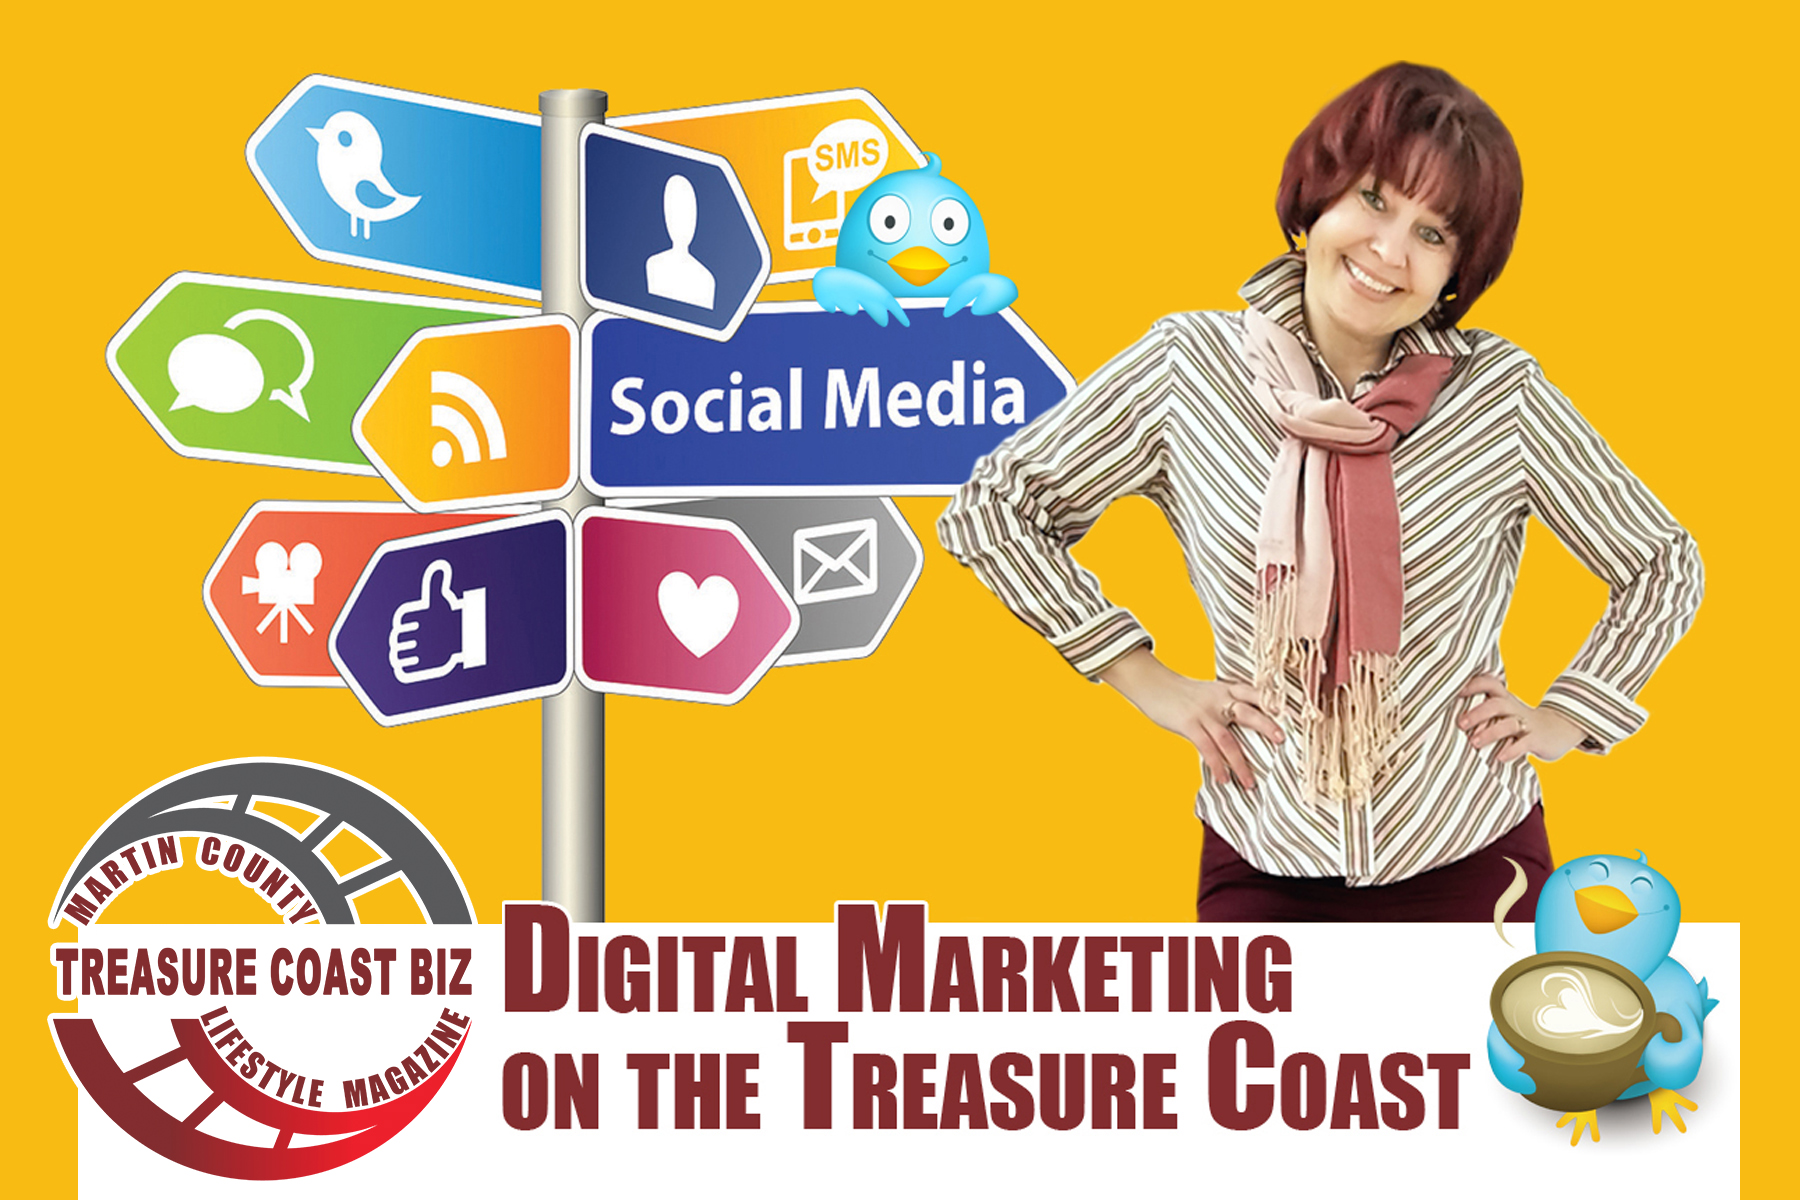 Treasure Coast Biz - MartinCountyLifestyleMag.com (MCLM Media Pro) - social media marketing agency in Downtown Stuart, Martin County, Florida. Professional photography, video production, graphics and website design.